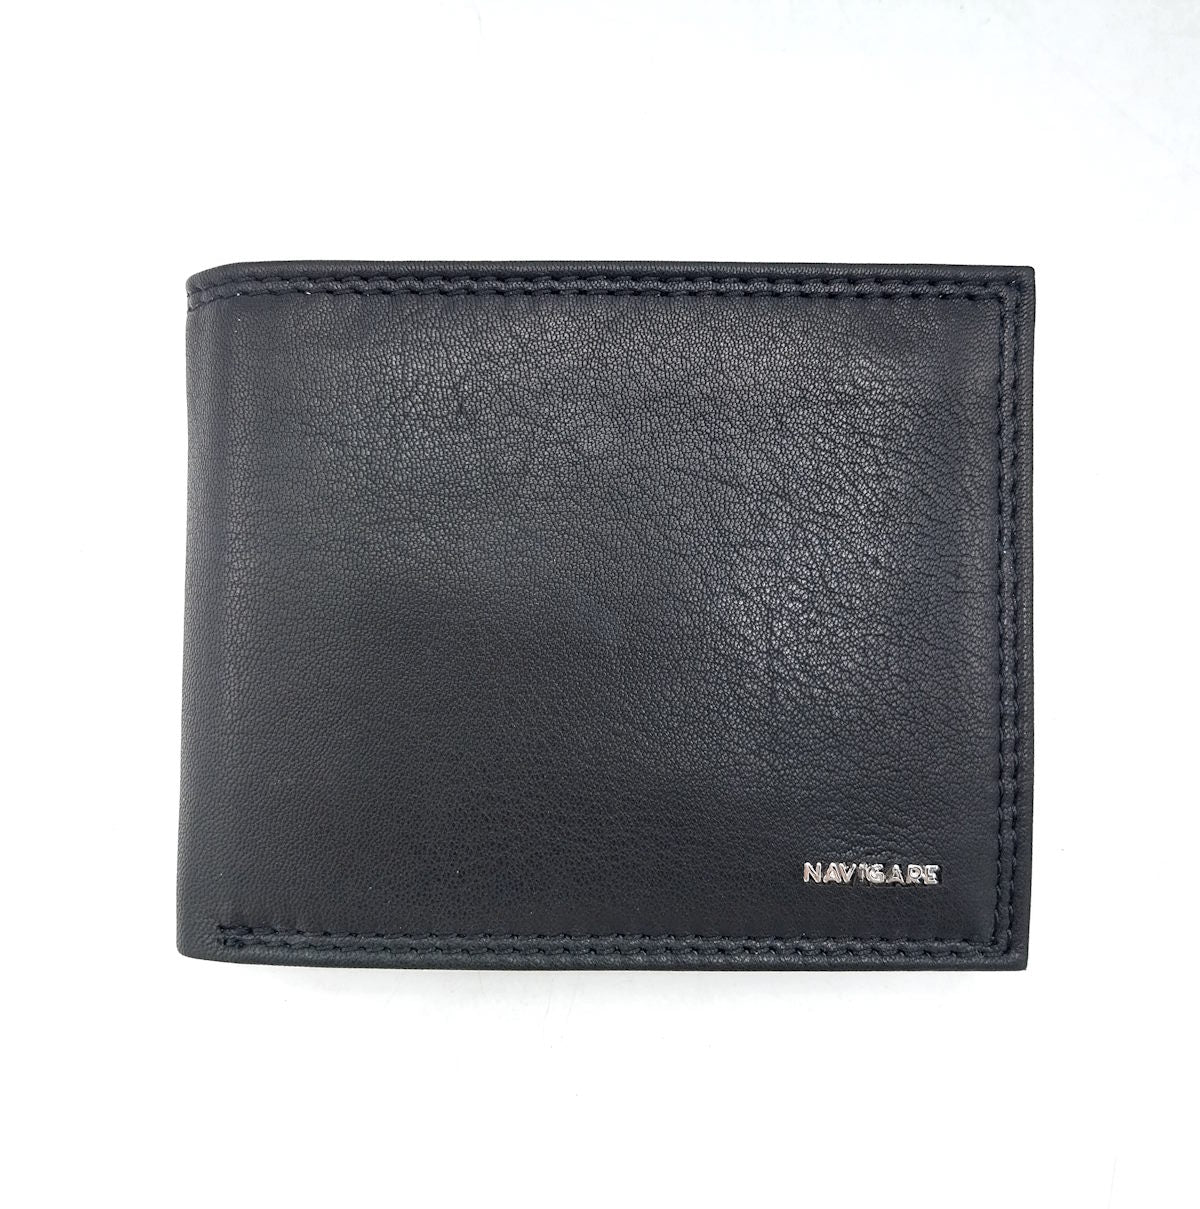 Genuine leather wallet, Navigare, art. pf748-9